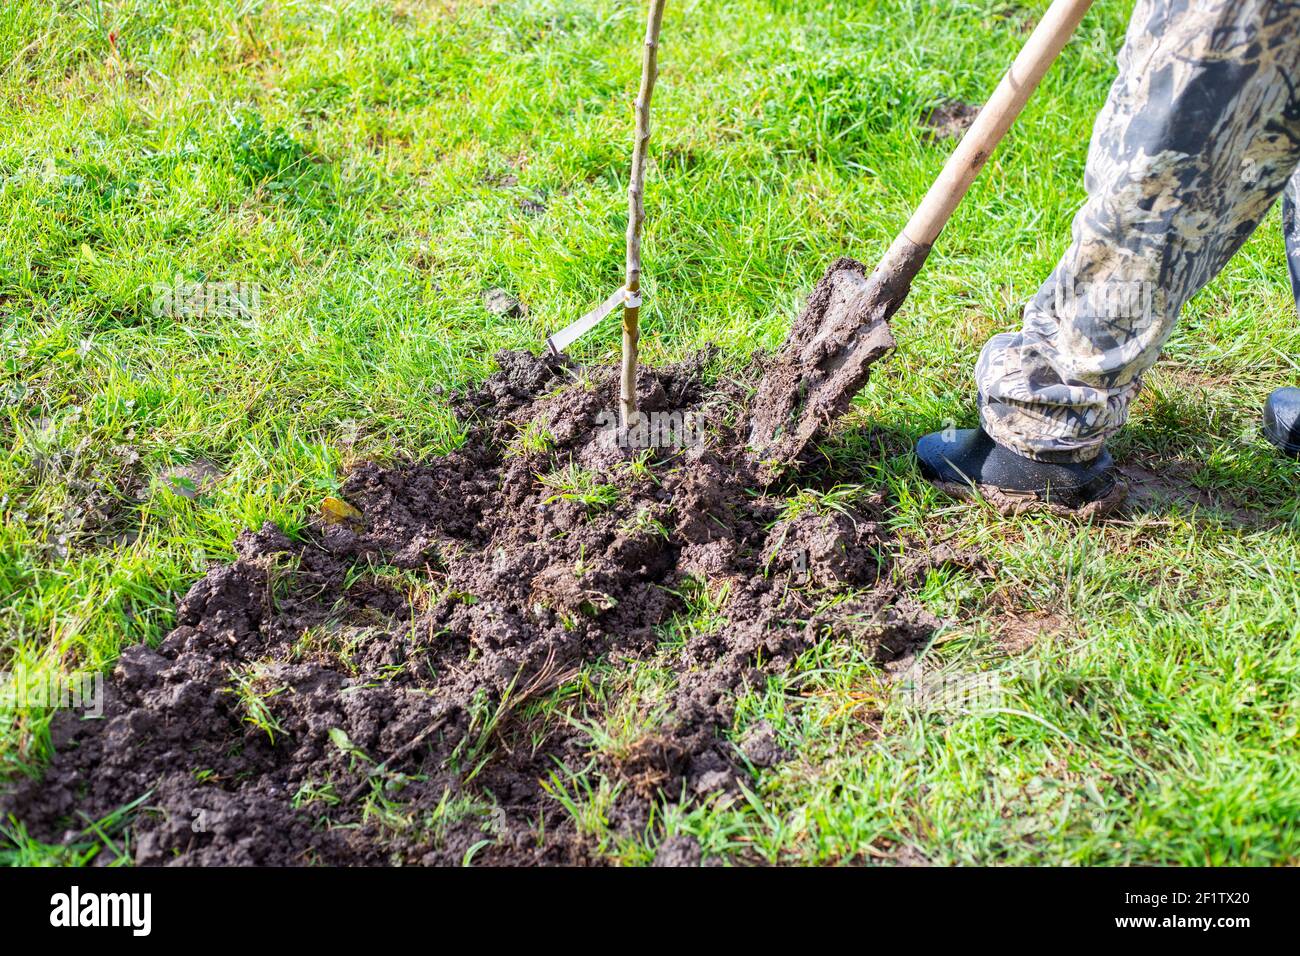 Planting seedlings of fruit trees. A man buries a young fruit tree in the garden with a shovel in the spring. Stock Photo